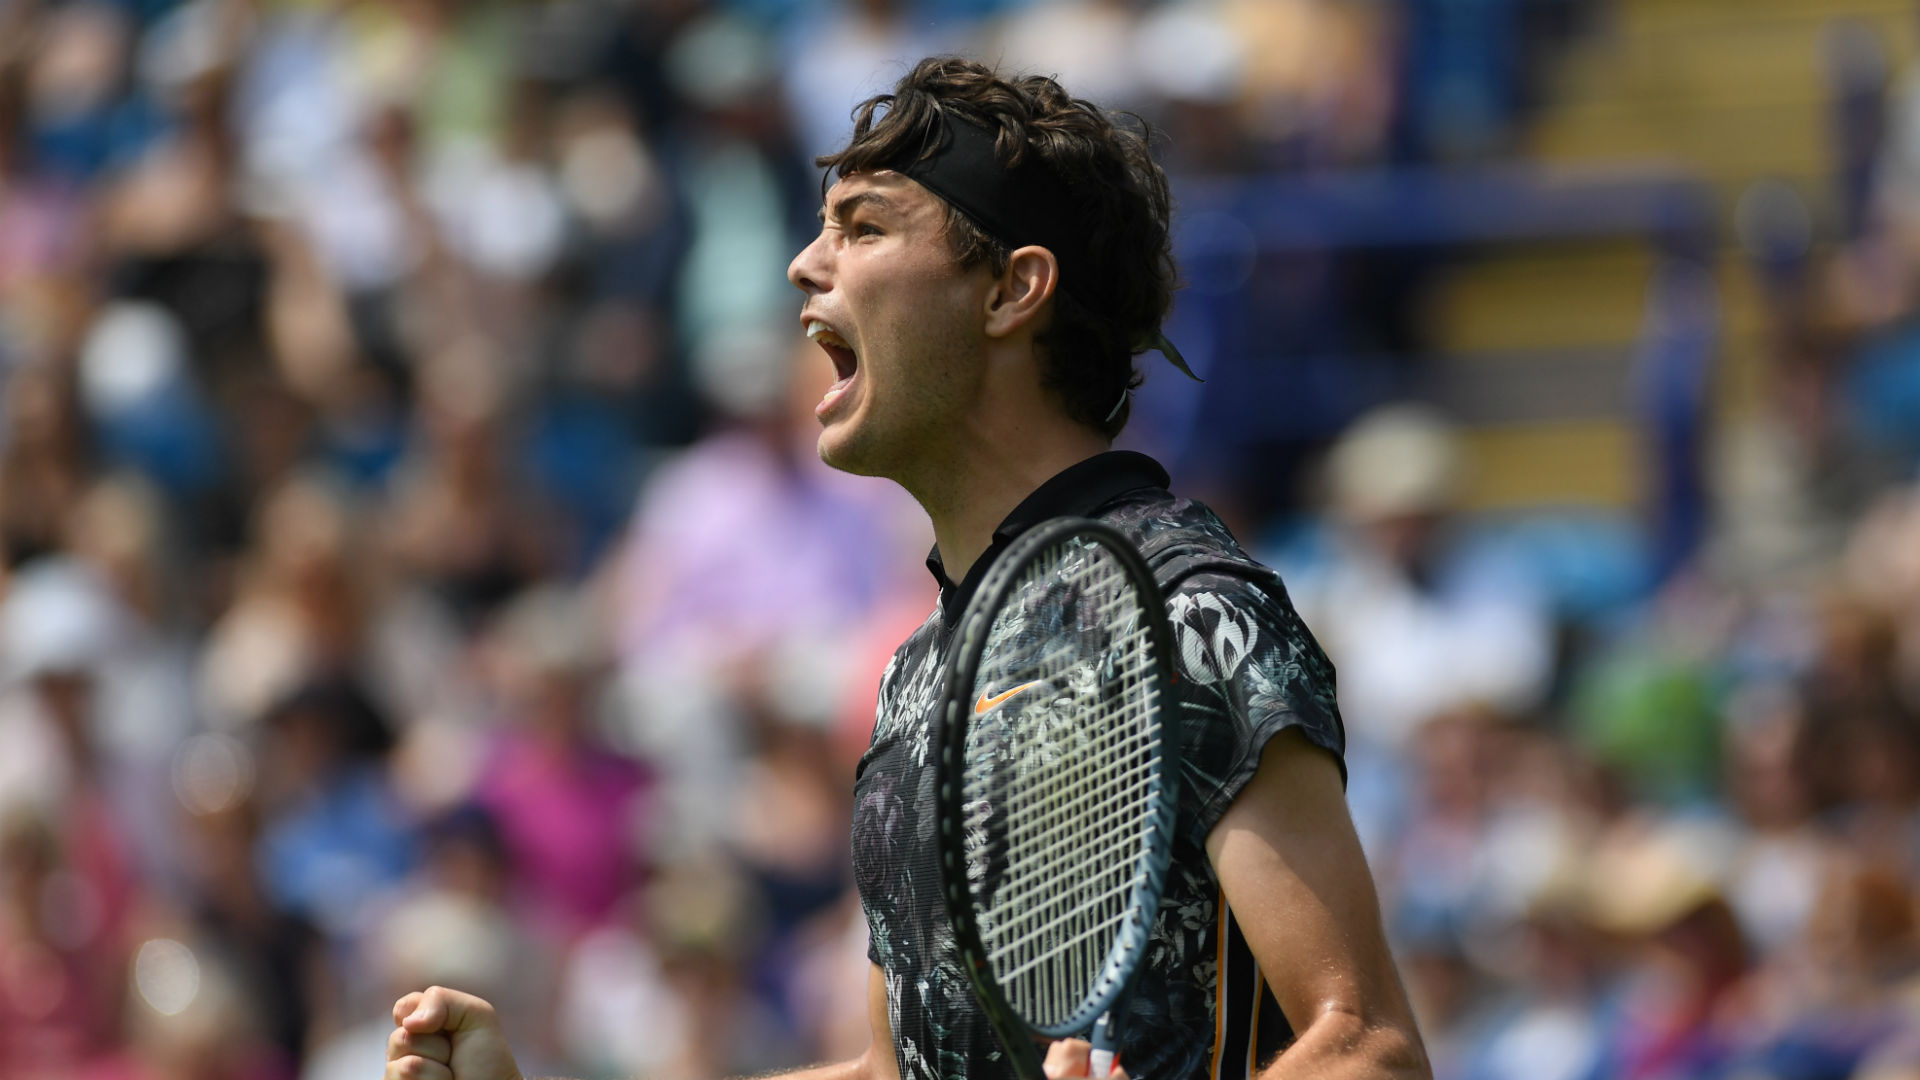 There were plenty of shocks at the Nature Valley International, with top seed Guido Pella among several favourites knocked out.